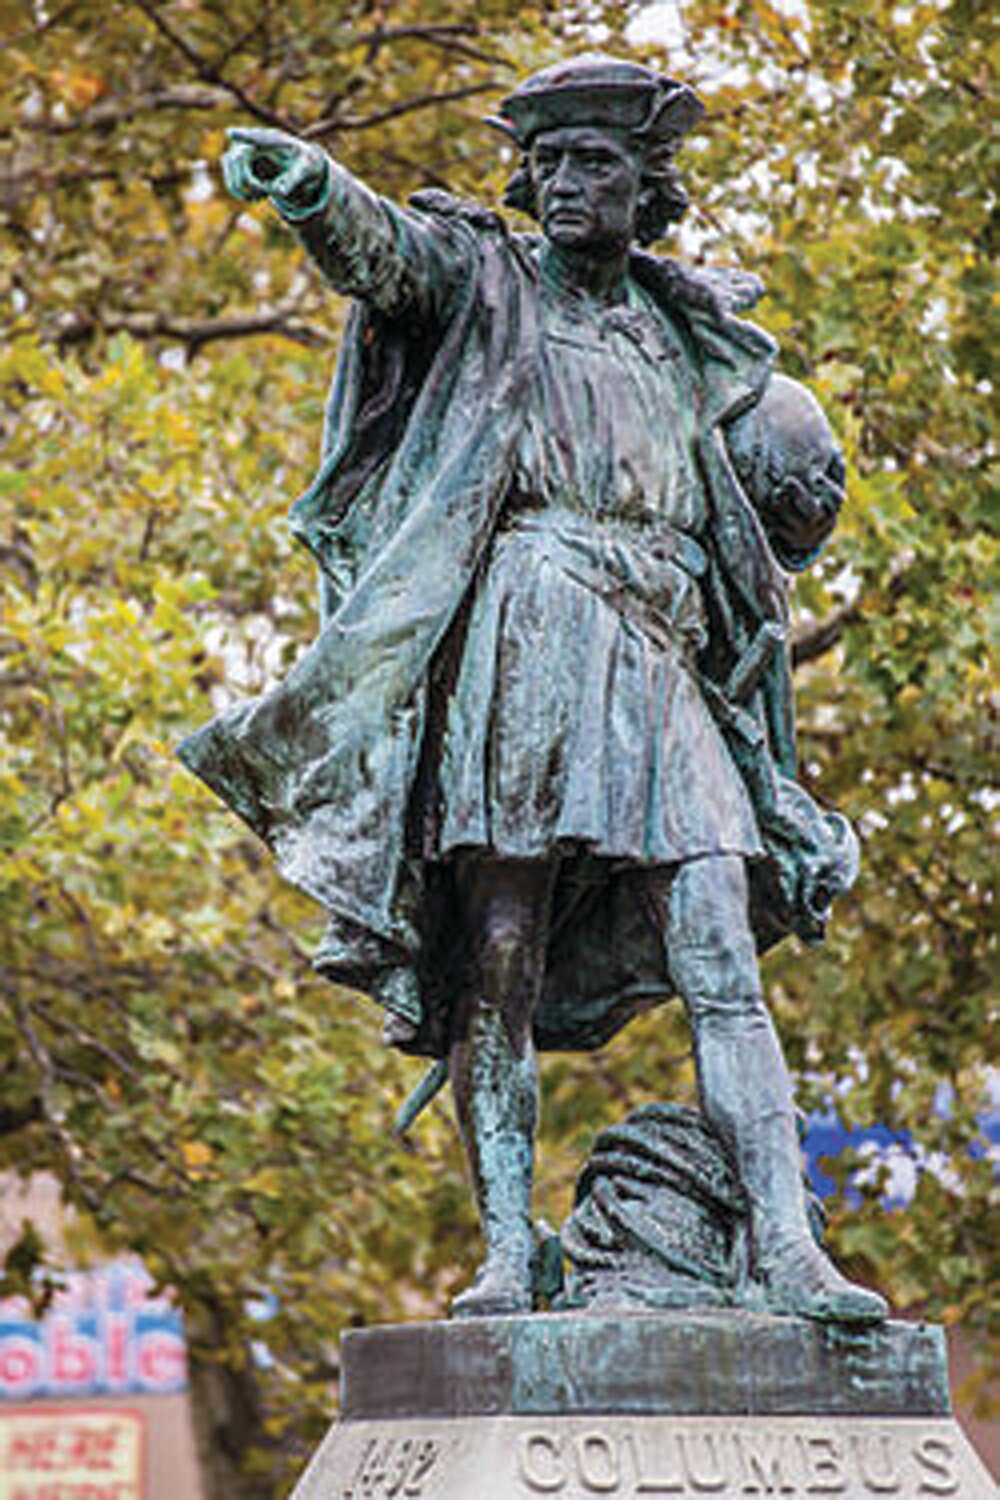 THE STATUE: The 130-year-old statue of Christopher Columbus stood in Providence since 1893, but was removed in 2020. It will be re-erected in Johnston on Columbus Day.